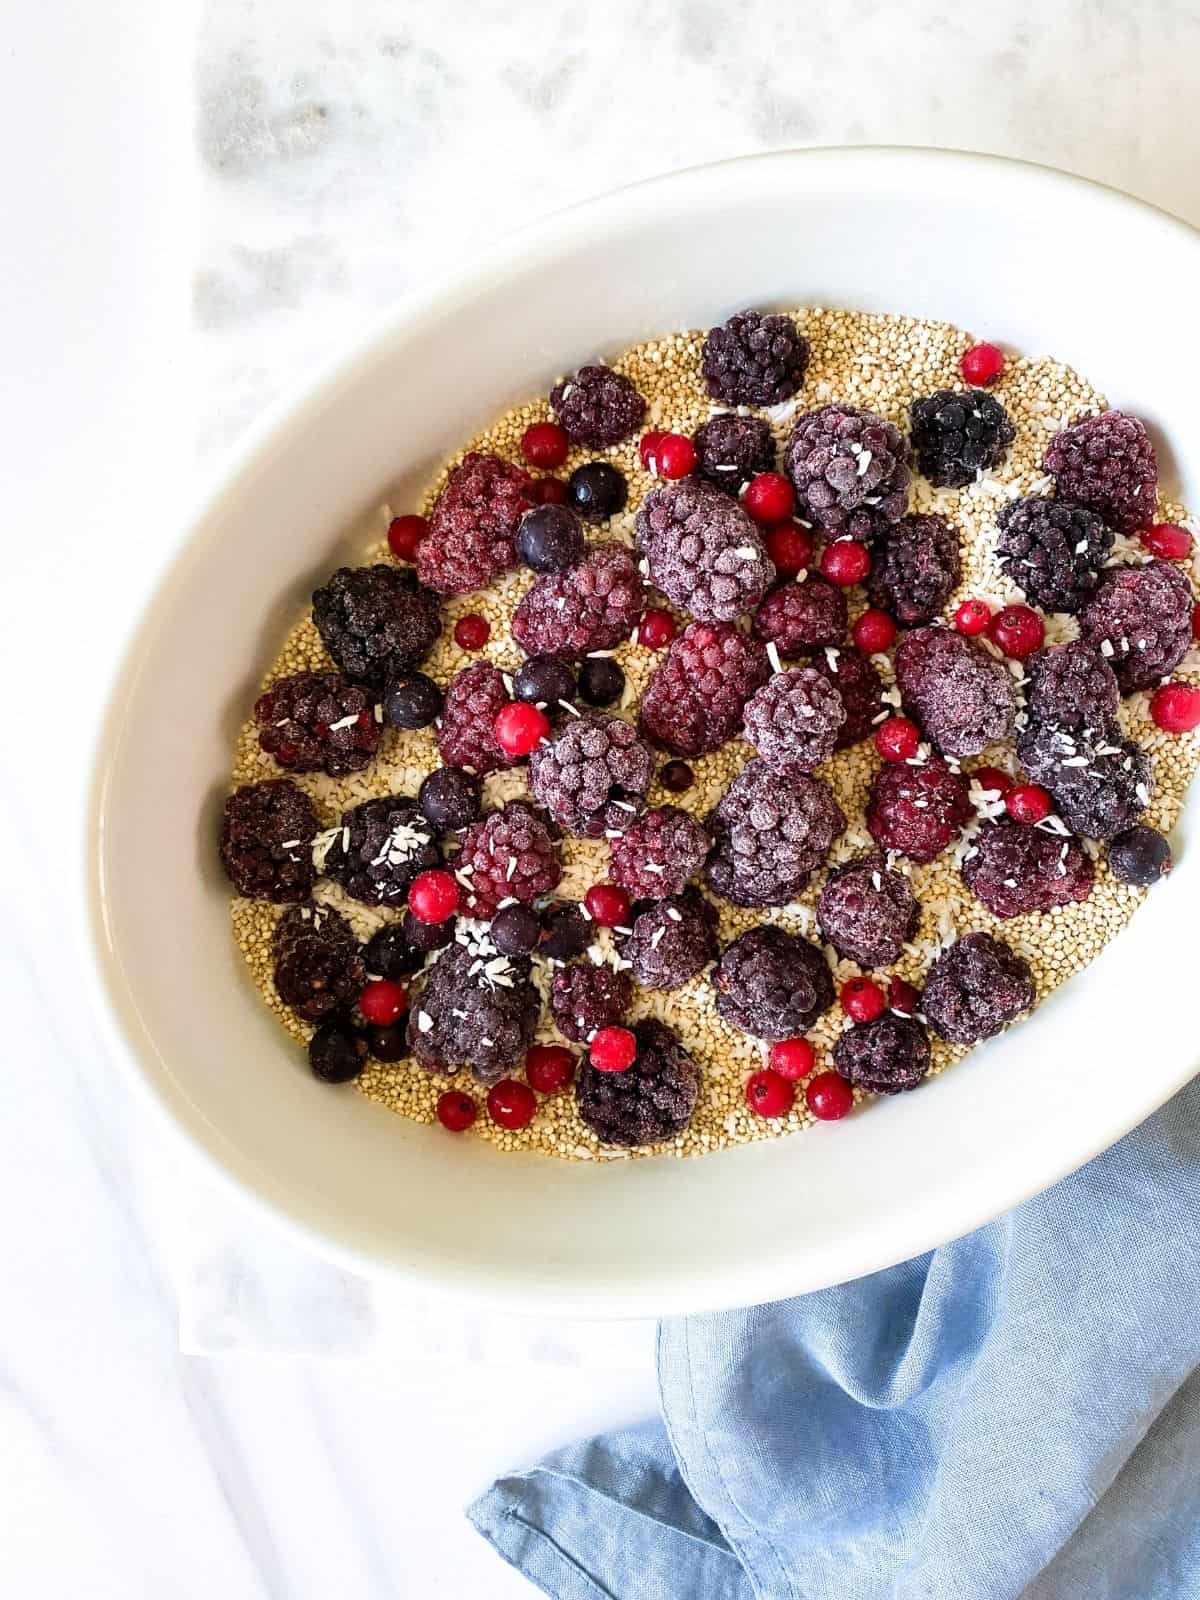 blackberries, red currants and quinoa in a white baking dish.